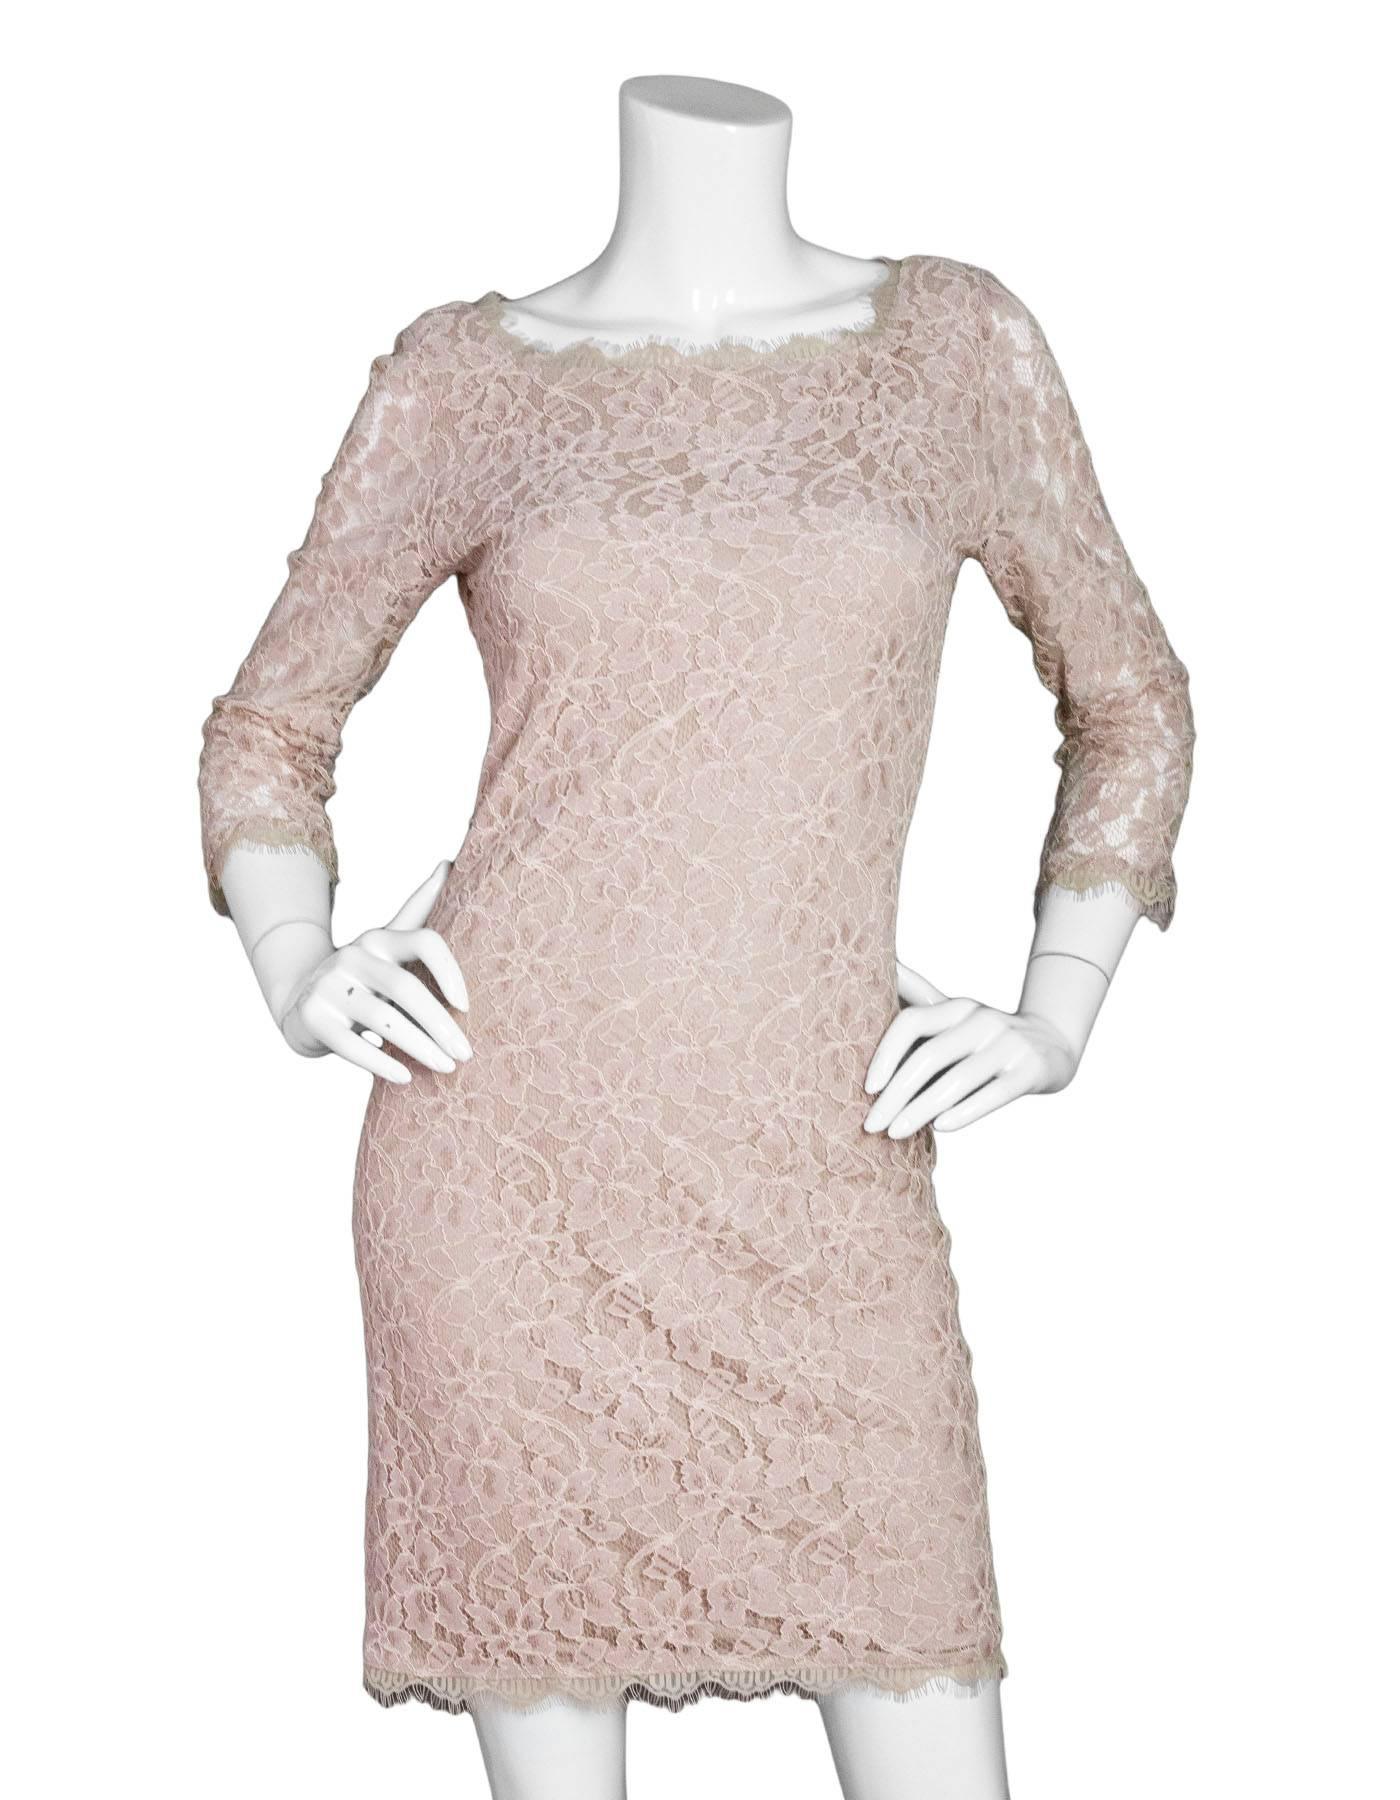 Diane von Furstenberg Nude Lace Dress Sz 6

Made In: USA
Color: Nude
Composition: 70% rayon, 30% nylon
Lining: Nude lining
Closure/Opening: Exposed back zip closure
Exterior Pockets: None
Overall Condition: Excellent pre-owned condition
Marked Size: